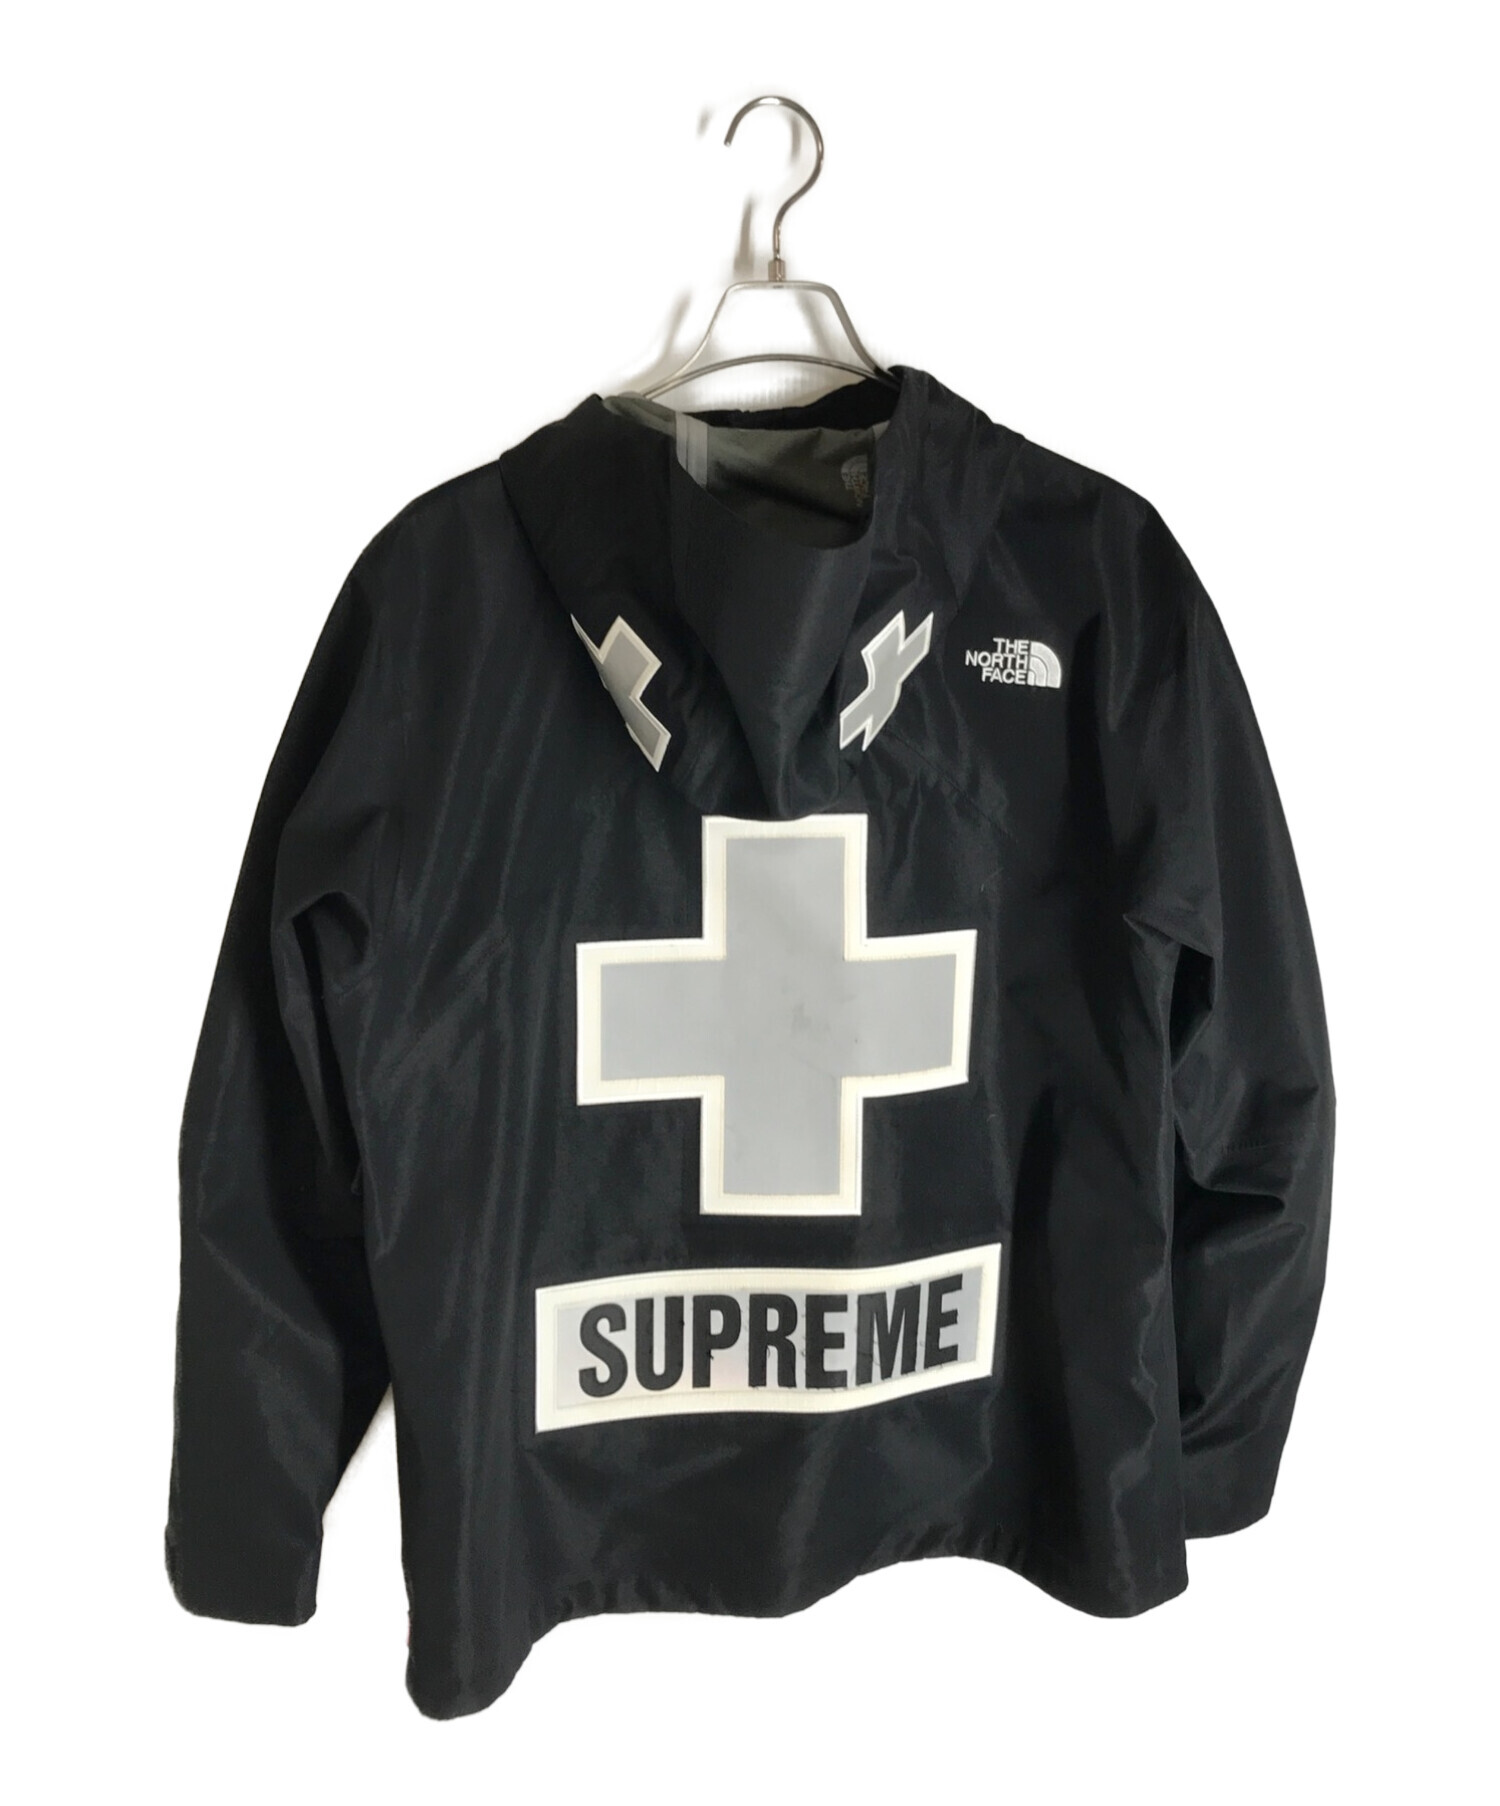 SUPREME × THE NORTH FACE 22SS ジャケット 黒 十字